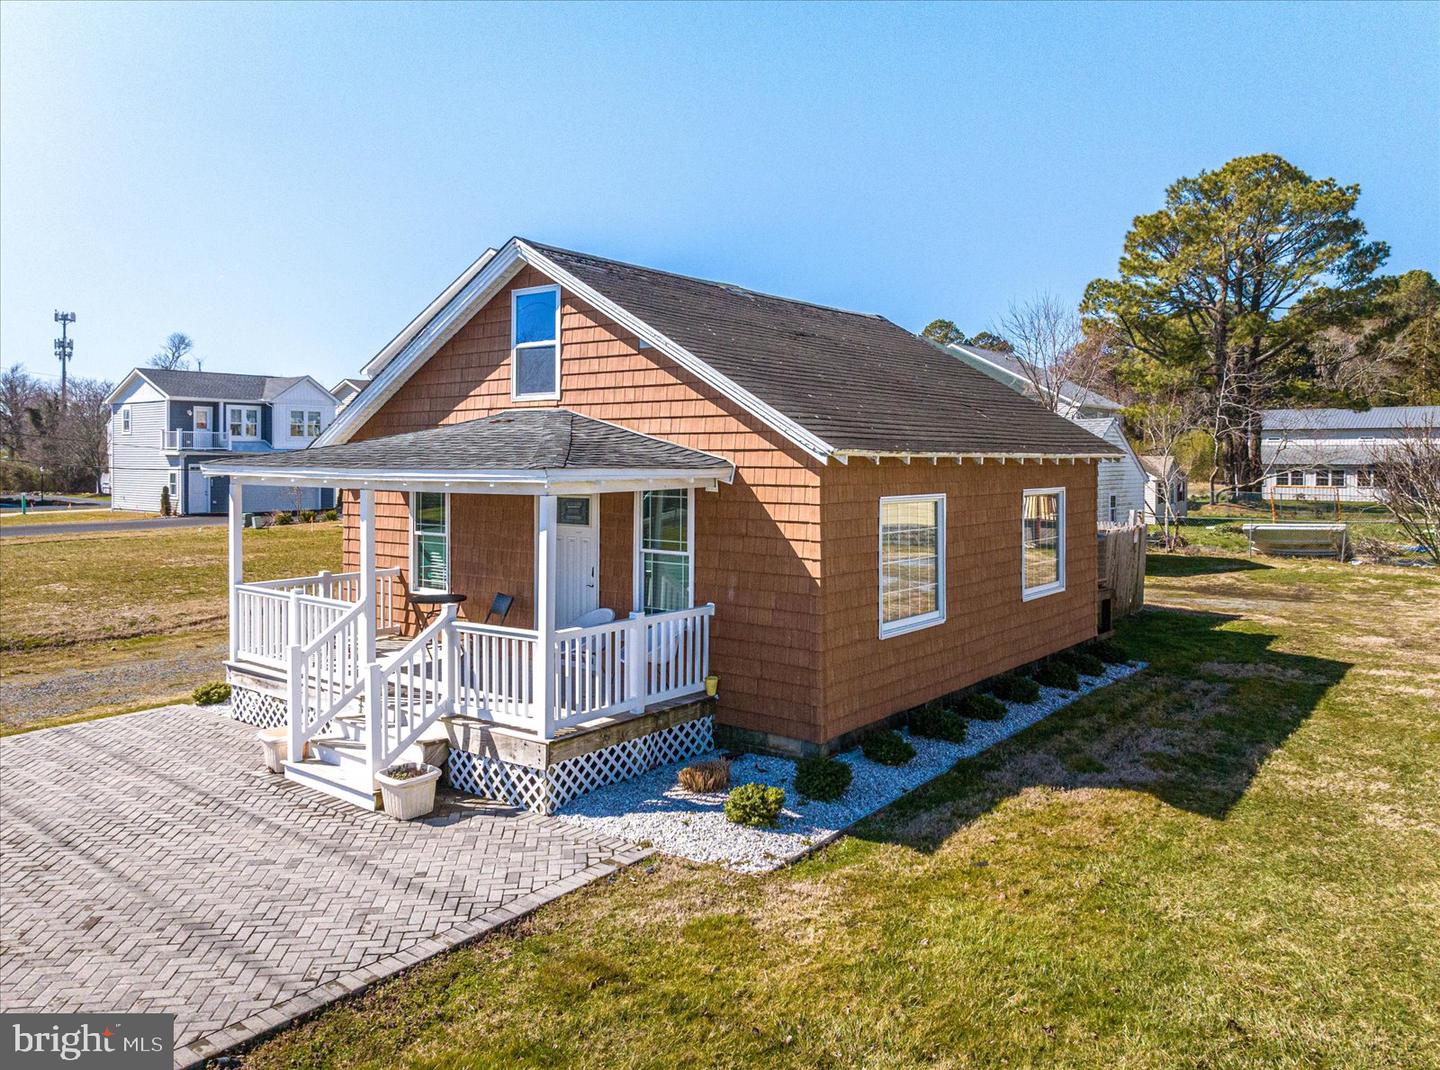 MDWO2019110-802902588170-2024-03-05-14-03-43 9801/9805 Golf Course Rd | Ocean City, MD Real Estate For Sale | MLS# Mdwo2019110  - 1st Choice Properties